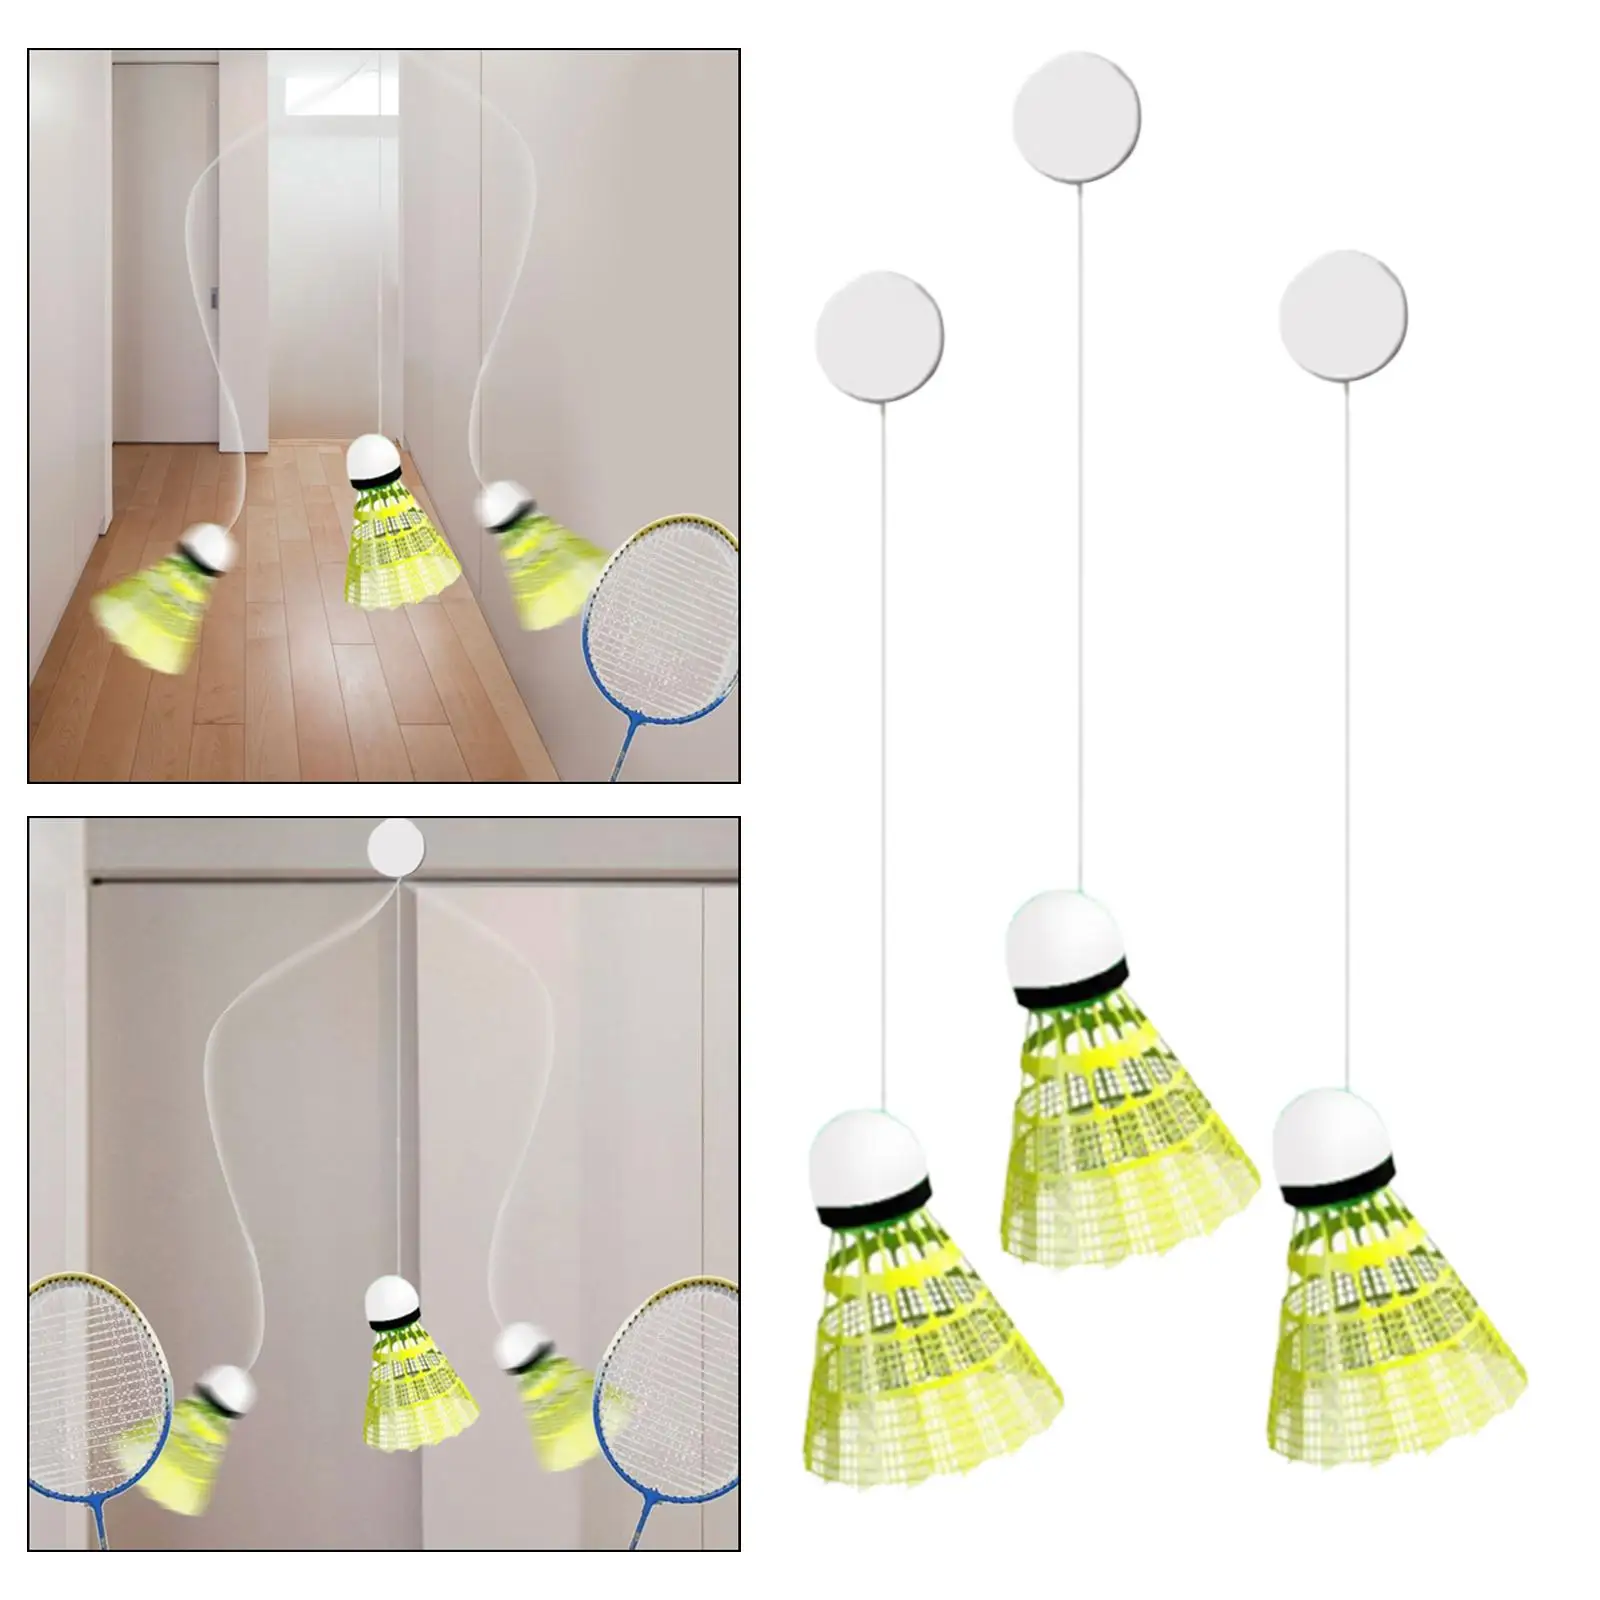 Badminton Solo Trainer Adjustable Height Aid with Shuttlecock Self Practice Trainer Badminton Training for Sports Fitness Home